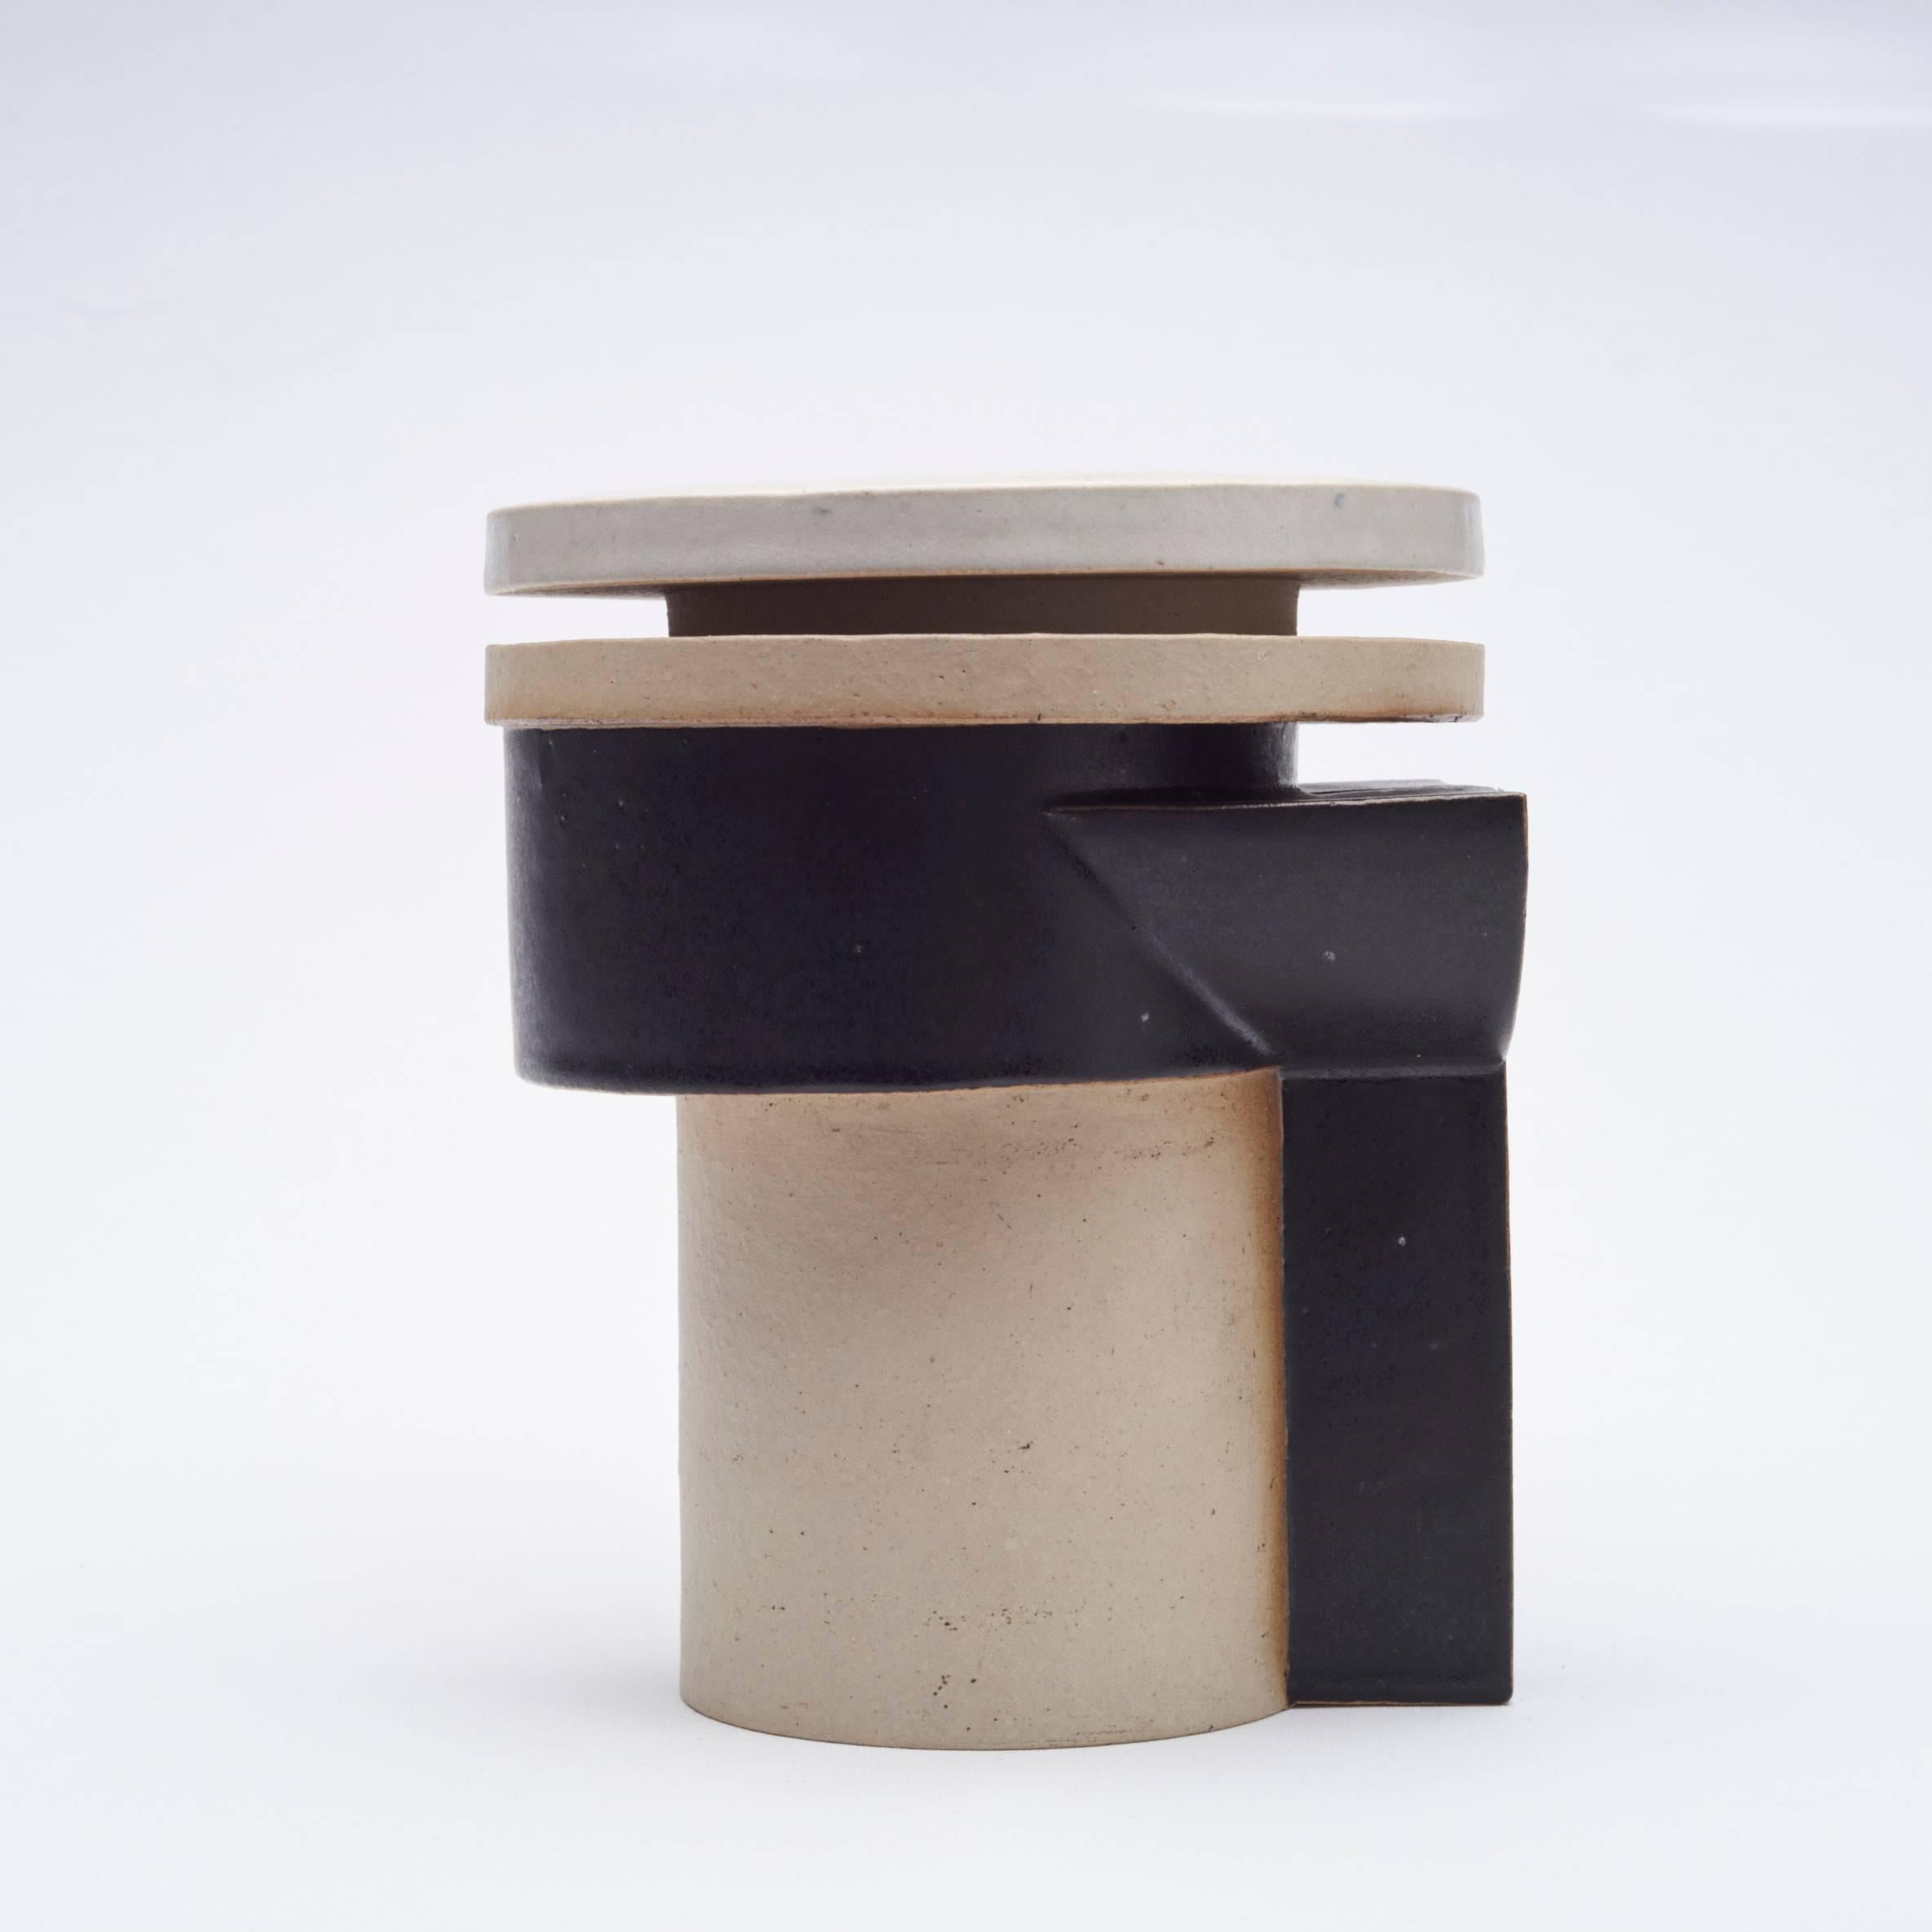 Fantastic sculpture made in 1977 by Fritz Vehring, built and mounted, matte cream and black glaze.